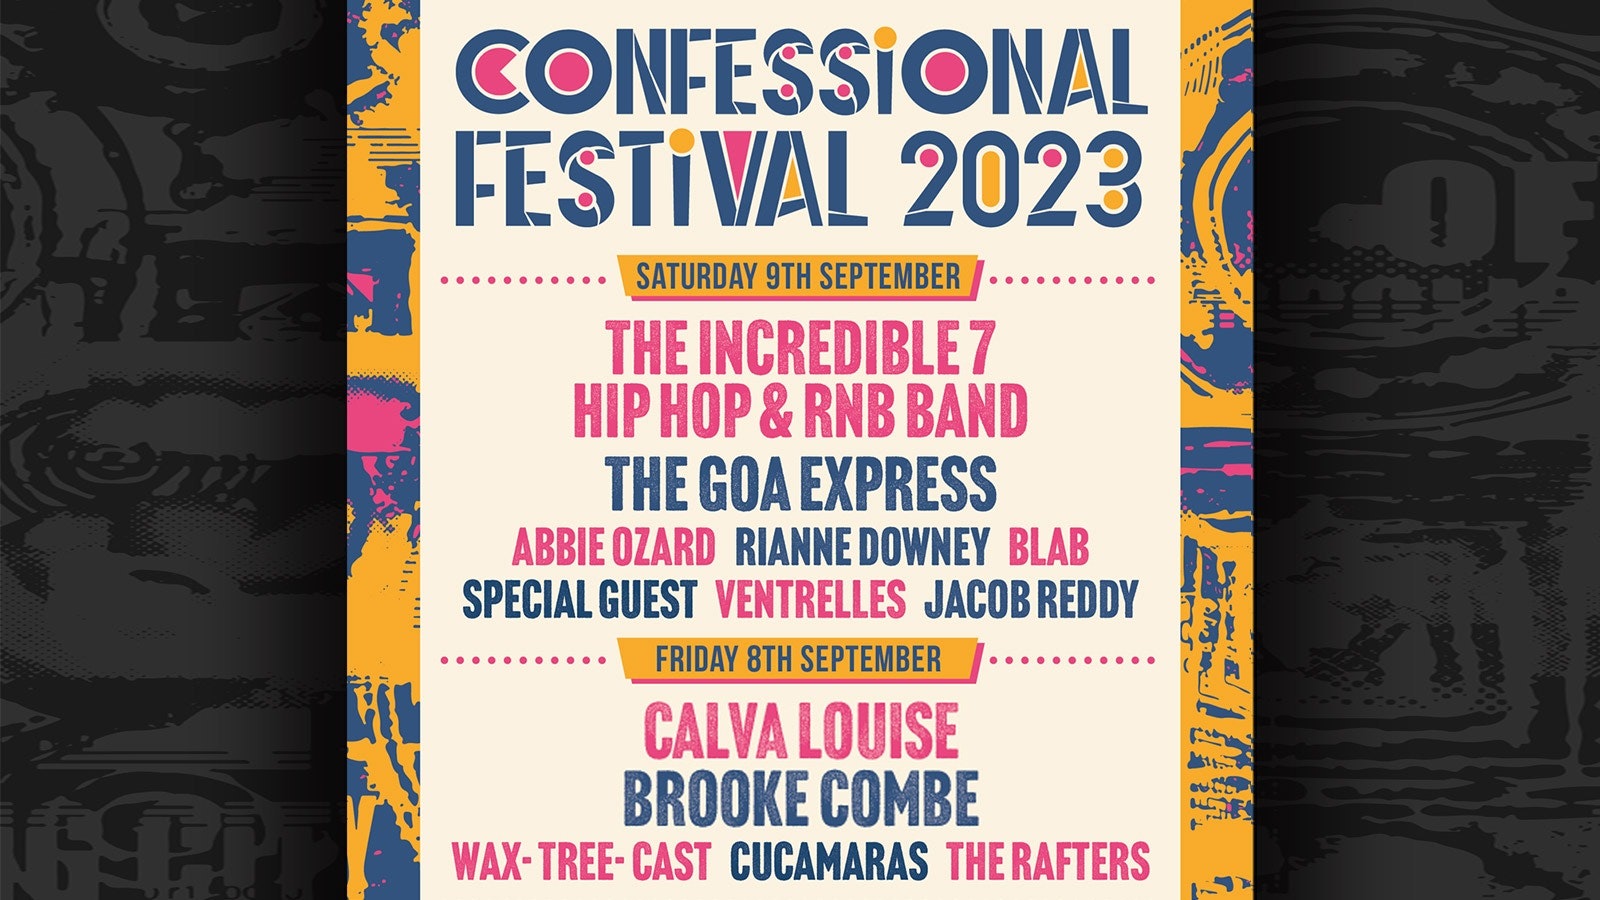 LAST FEW TICKETS REMAINING: Confessional Festival 2023